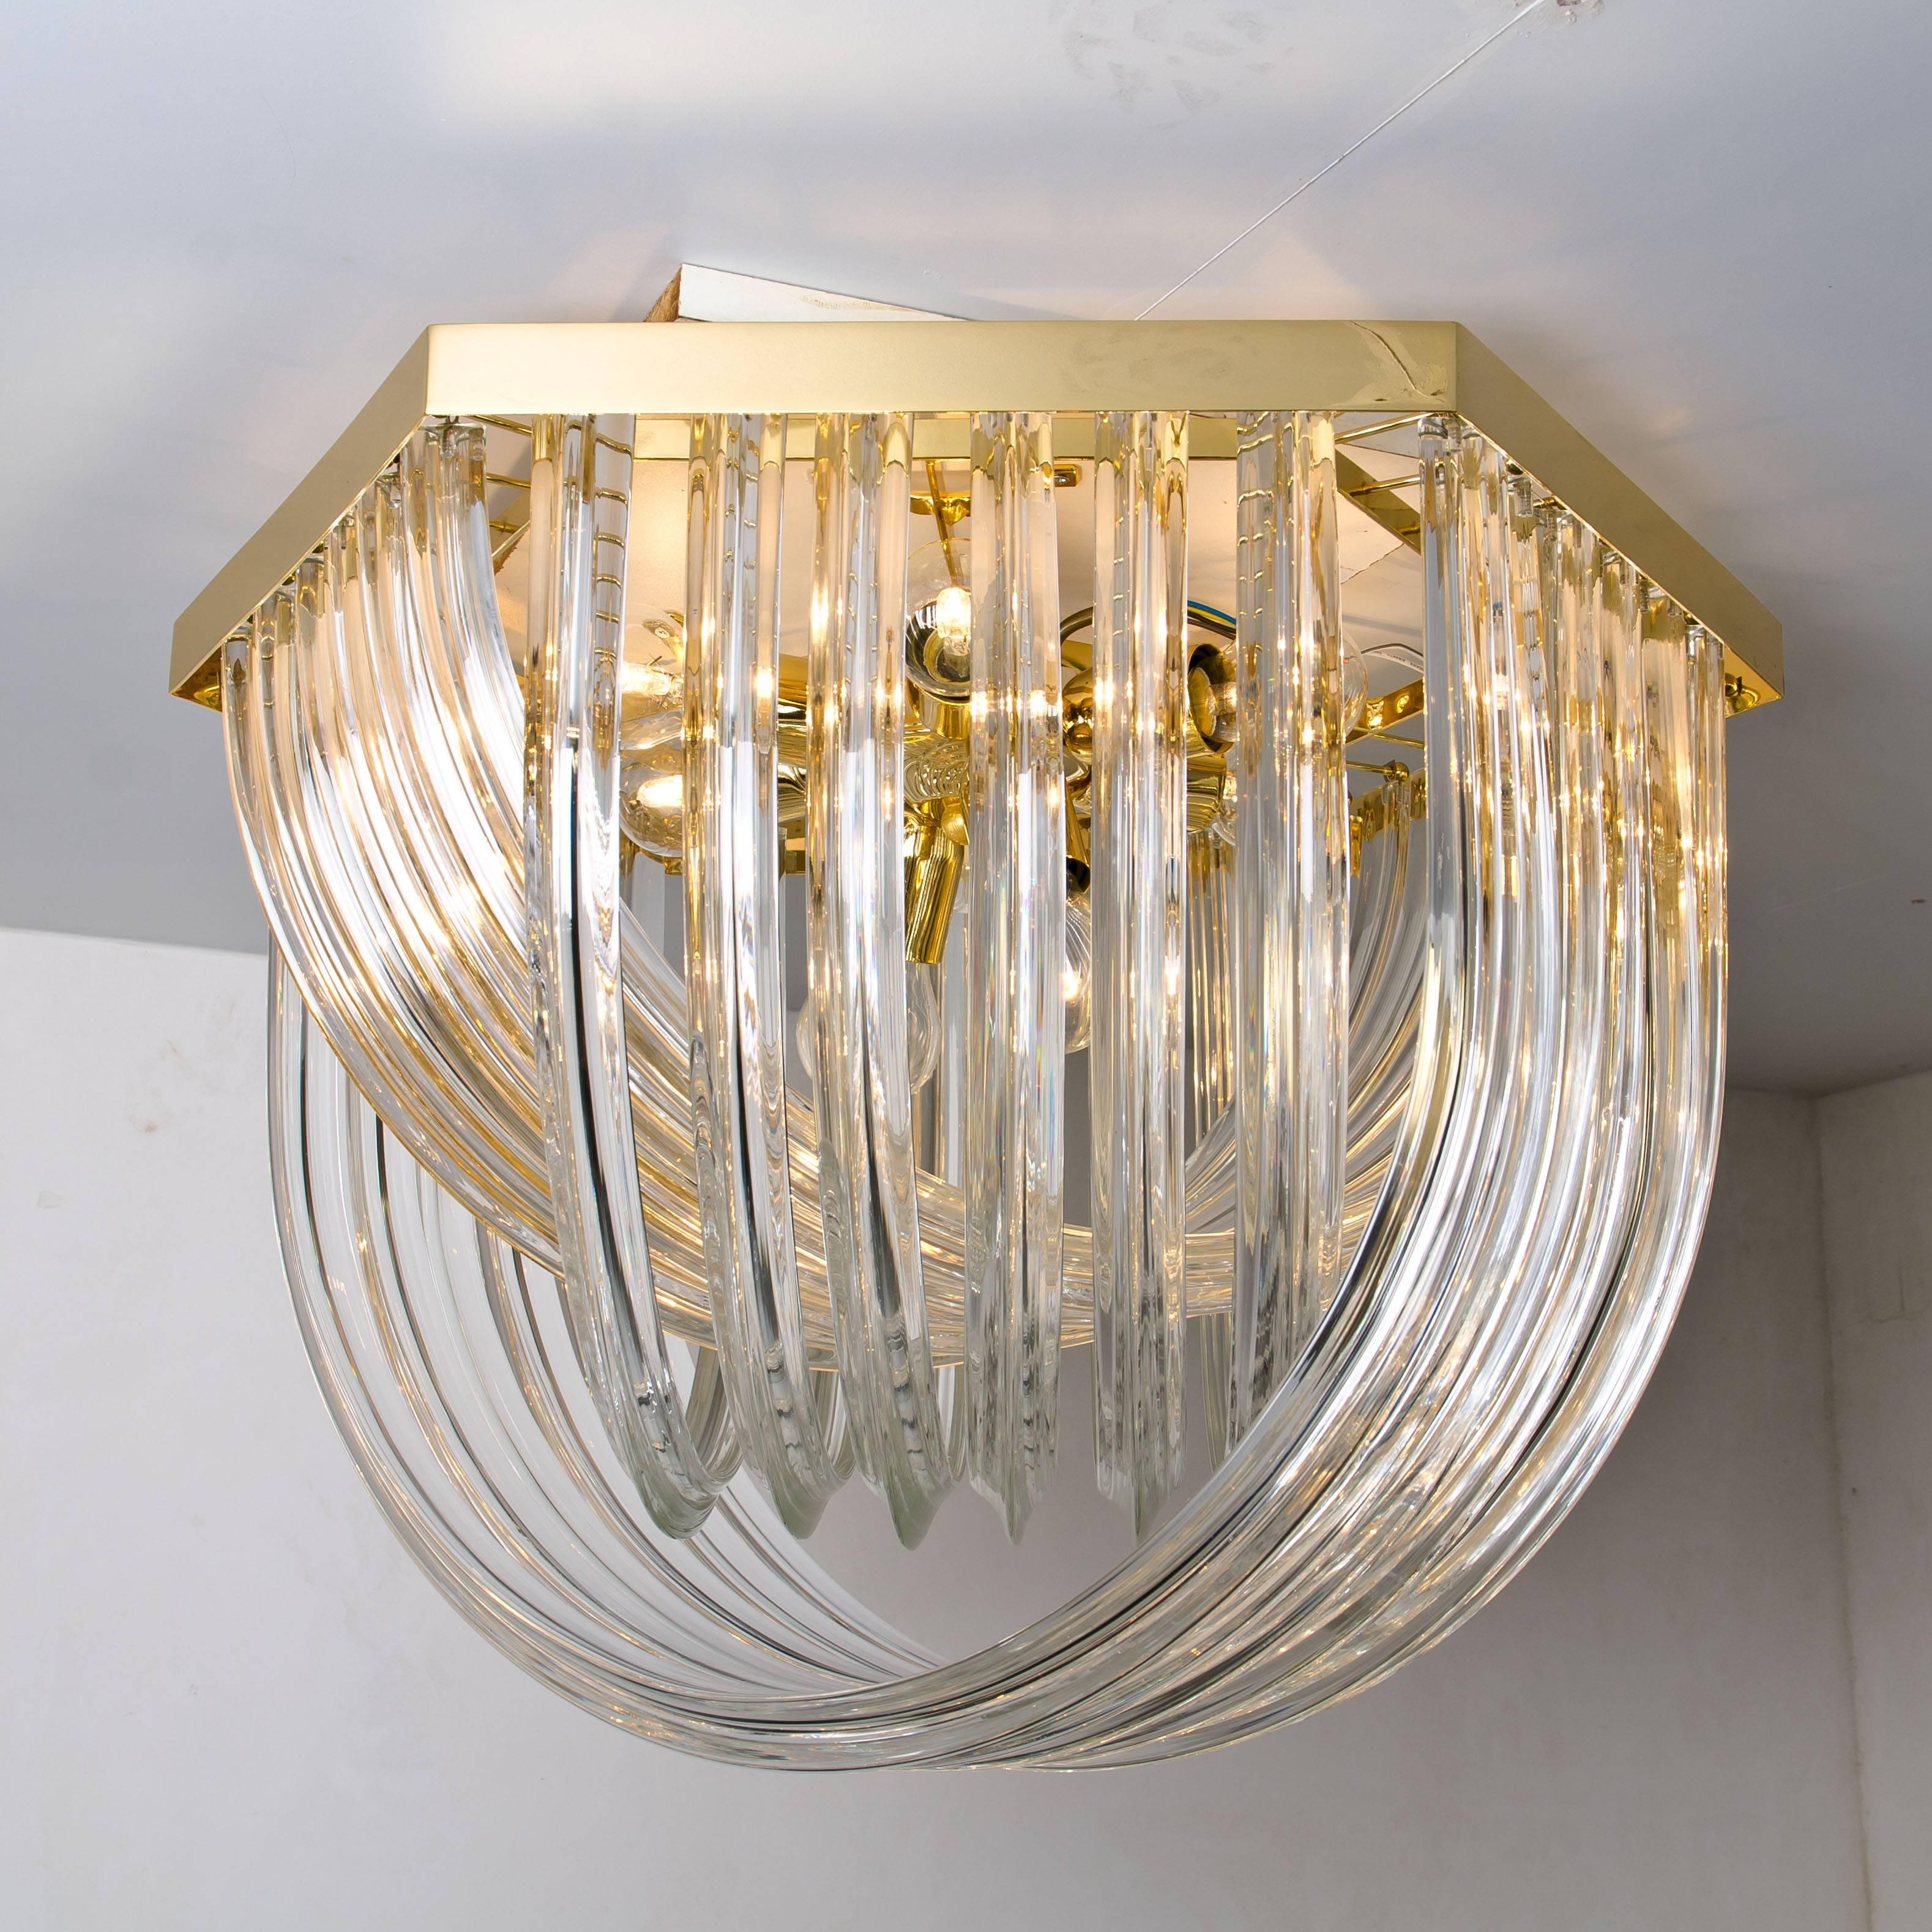 A huge and impressive Venini flushmount chandelier, curved crystal glass and gilt brass, Italy.

The chandelier is made of curved crystal Murano glasses in different lengths. The flushmount has eight lights with 18 Murano crystal tubes and a